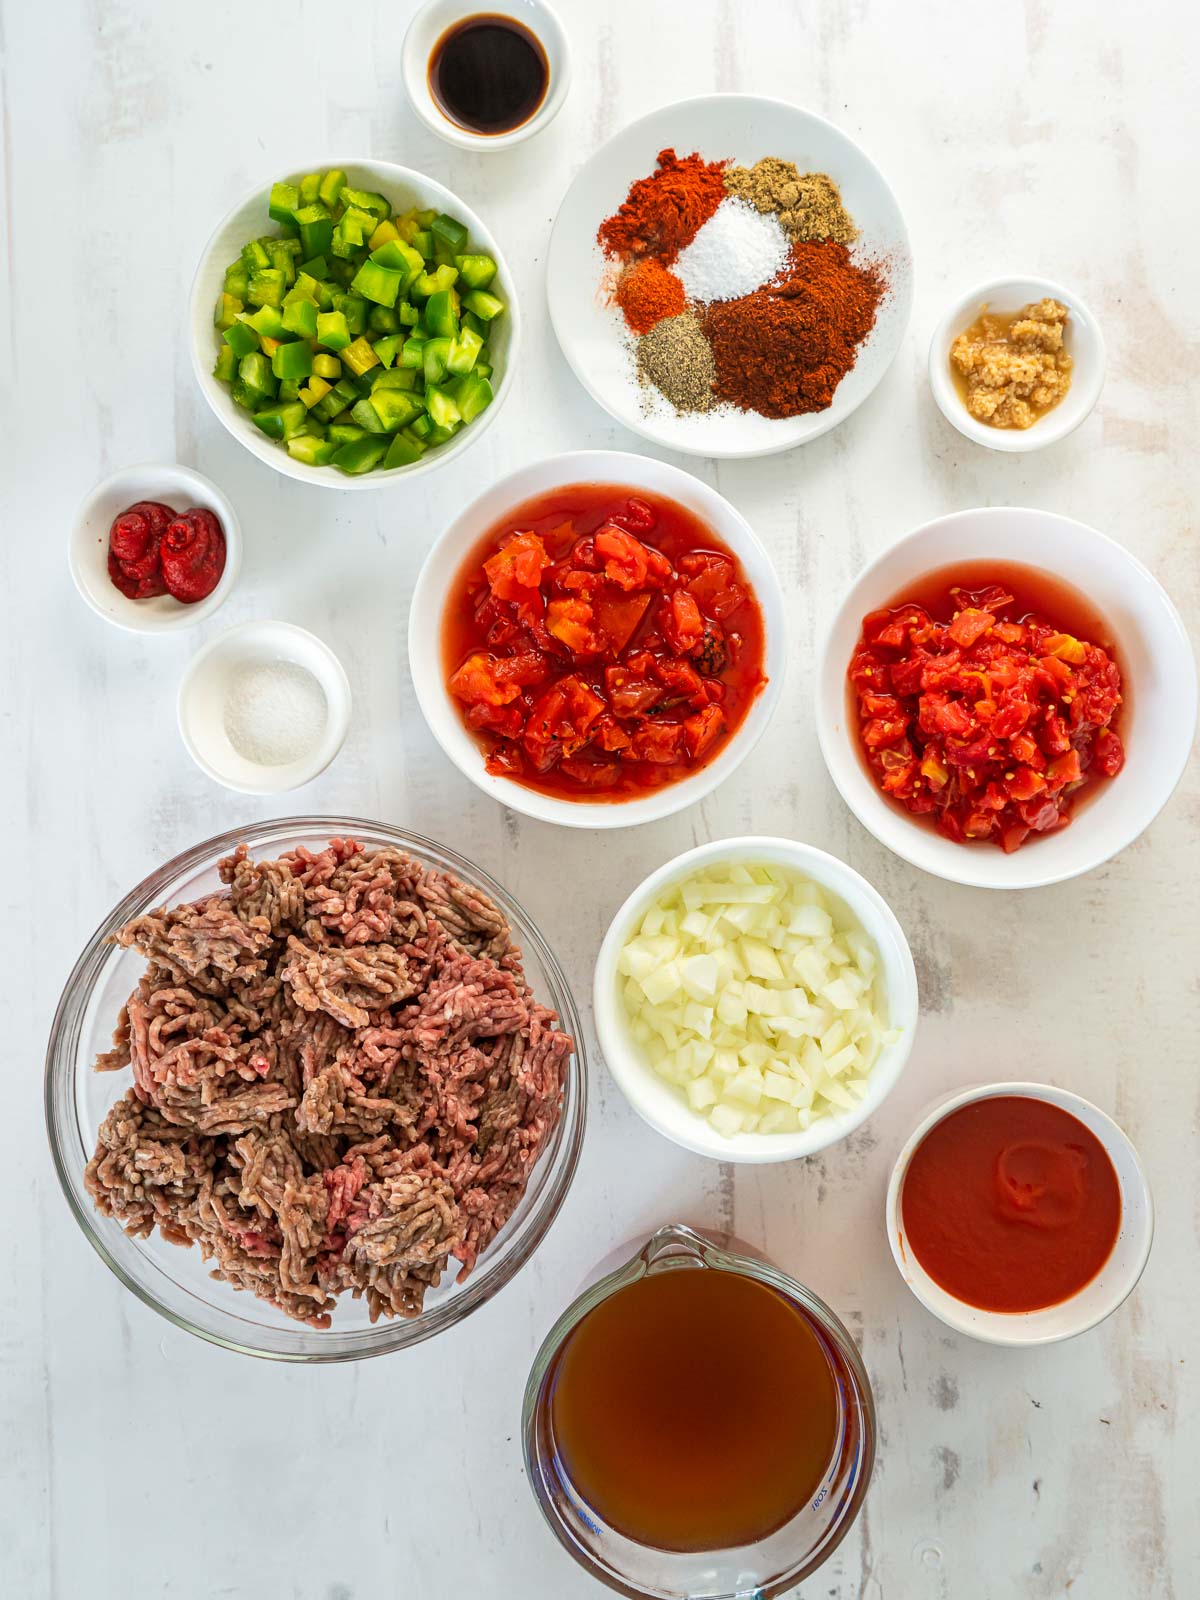 Ingredients for chili in bowls- ground beef, onions, green peppers, chopped tomatoes, spices, garlic, tomato paste, and broth.